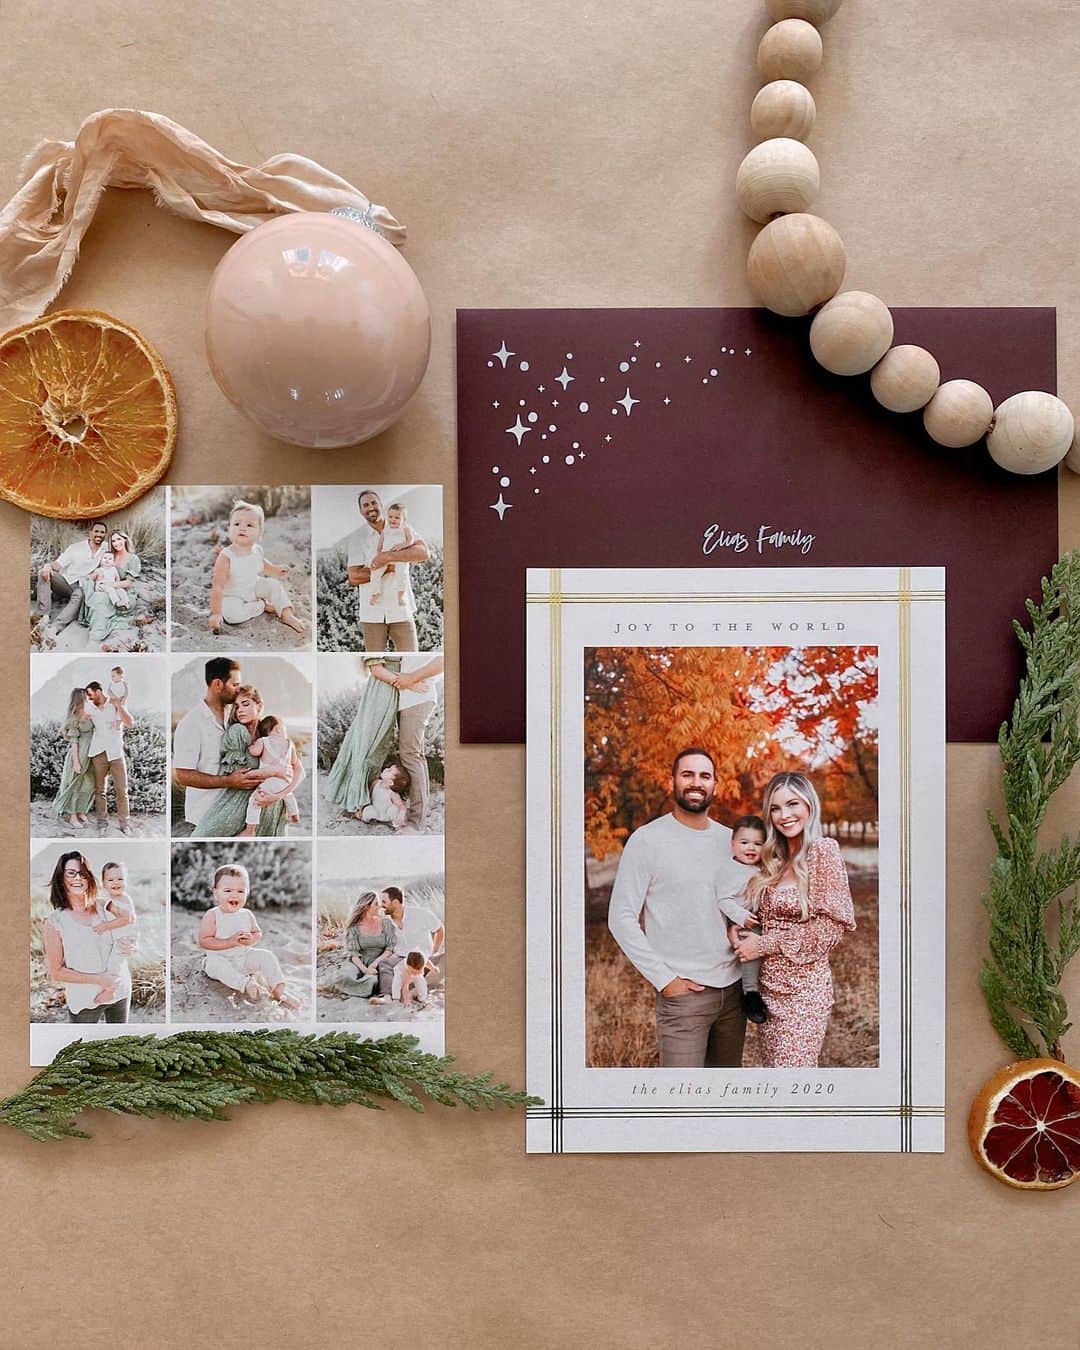 carlyのインスタグラム：「One of my favorite winter traditions is sending and receiving Christmas cards! There’s something extra special and nostalgic about opening cards from your loved ones. I have so much fun designing ours each year. I also adore looking back on our cards from past years and I want my kids to have that as well ☺️  @minted always offers the best holiday cards featuring designs by independent artists. They also offer free recipient addressing which is such a time saver! #MintedHoliday」